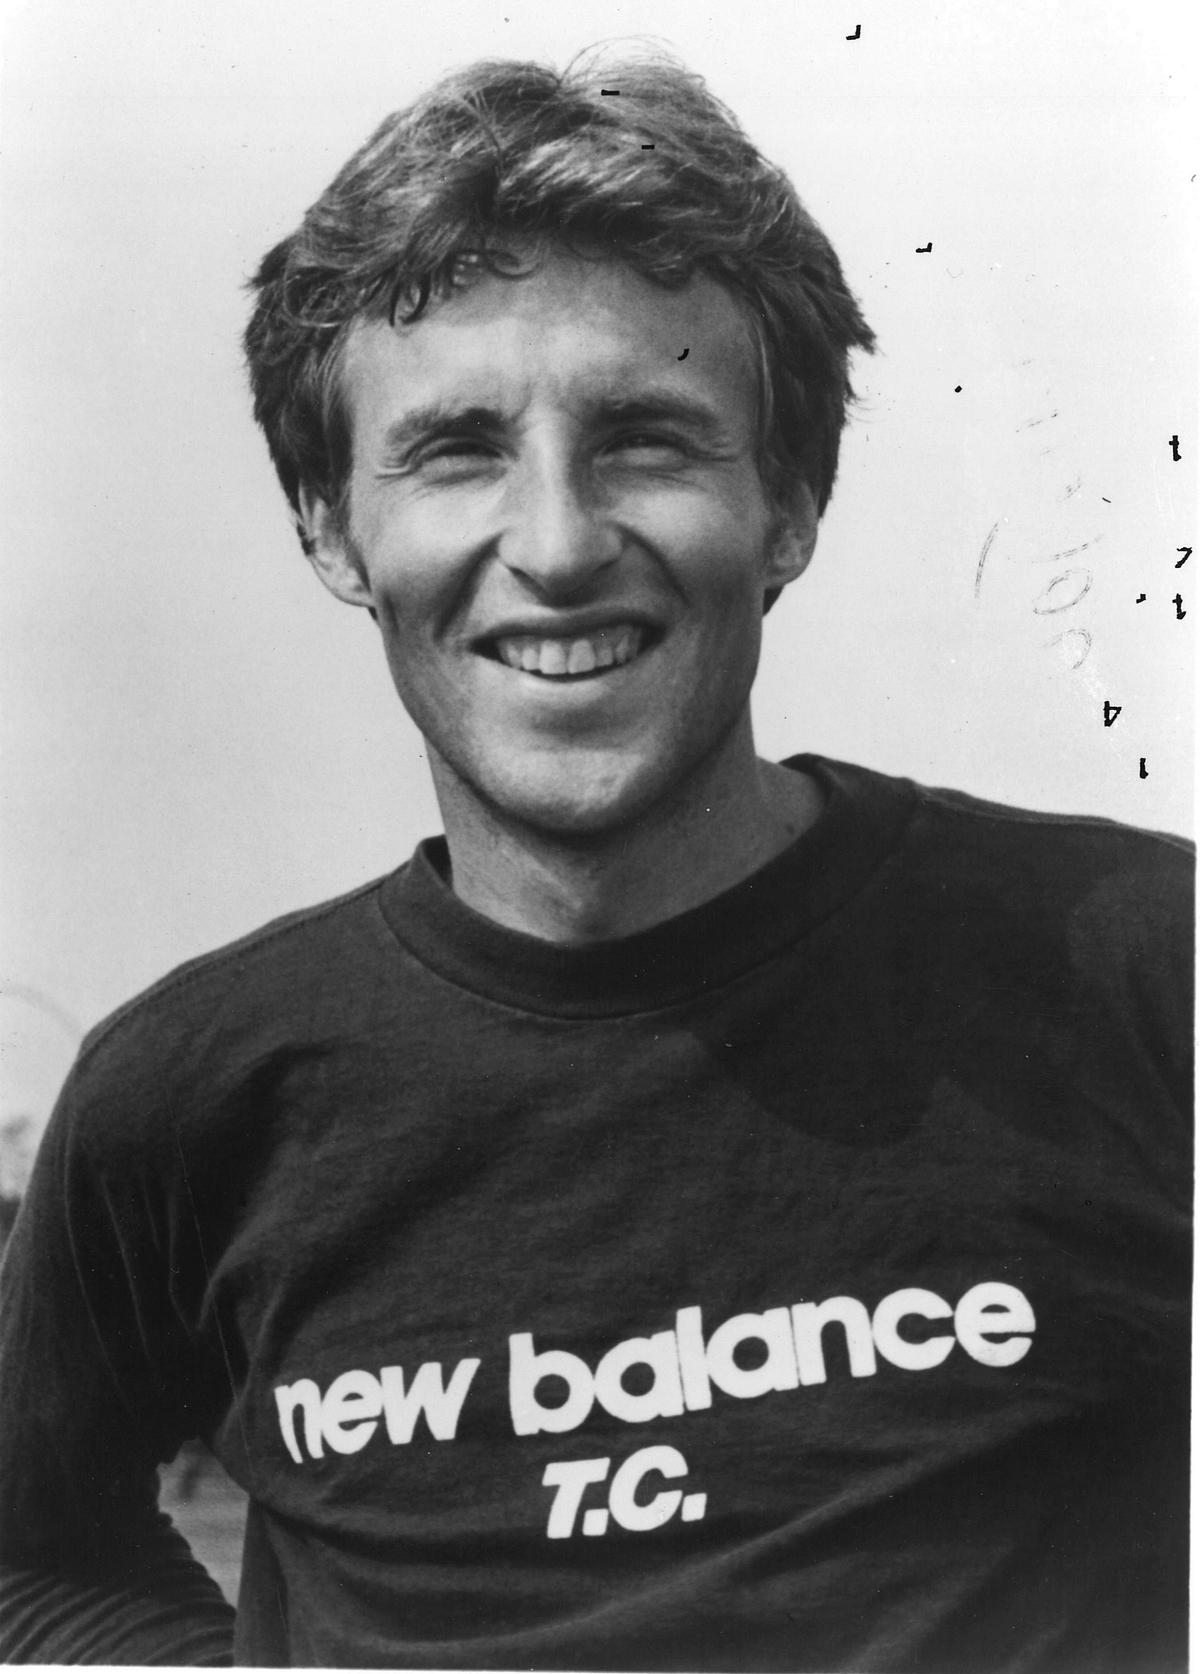 Dick Beardsley as a young marathoner. (Courtesy of <a href="https://www.facebook.com/profile.php?id=100063608980752">Dick Beardsley</a>)